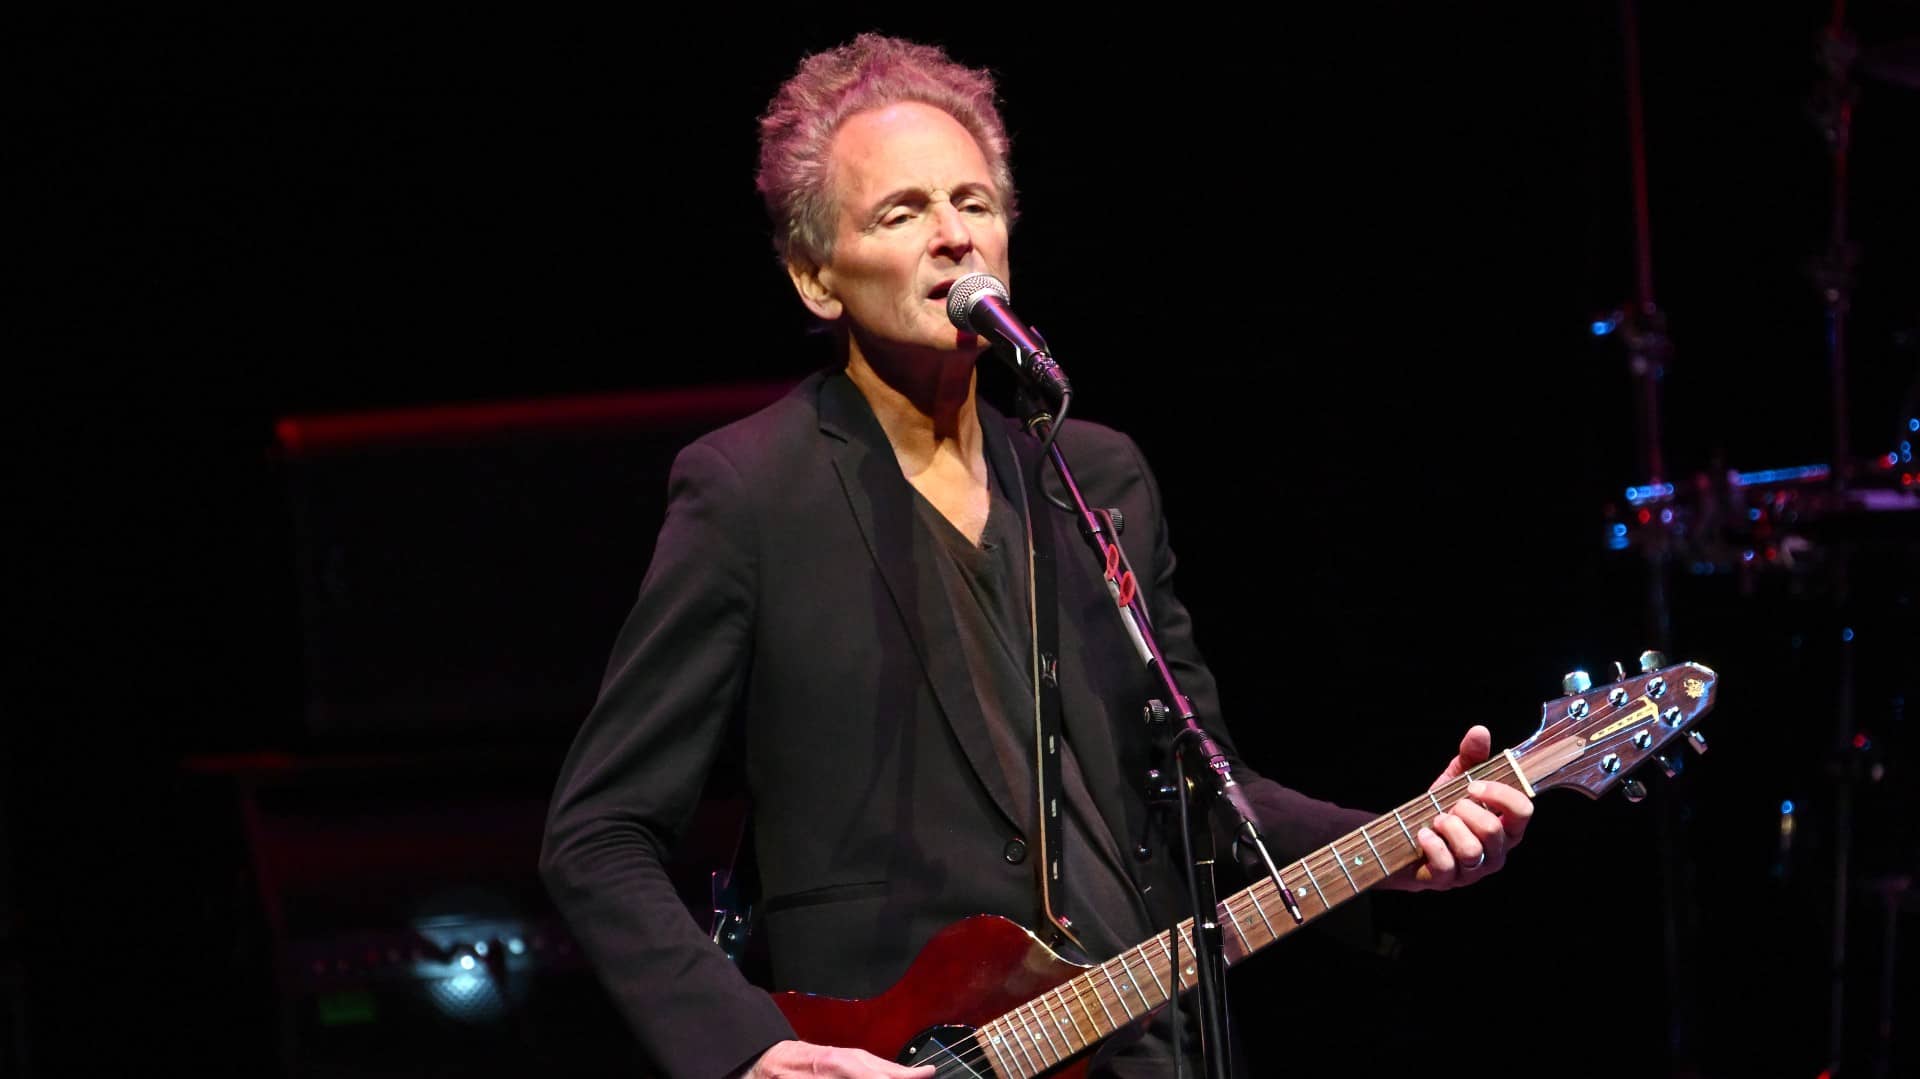 Lindsey Buckingham working on a new album | 97.7 The River